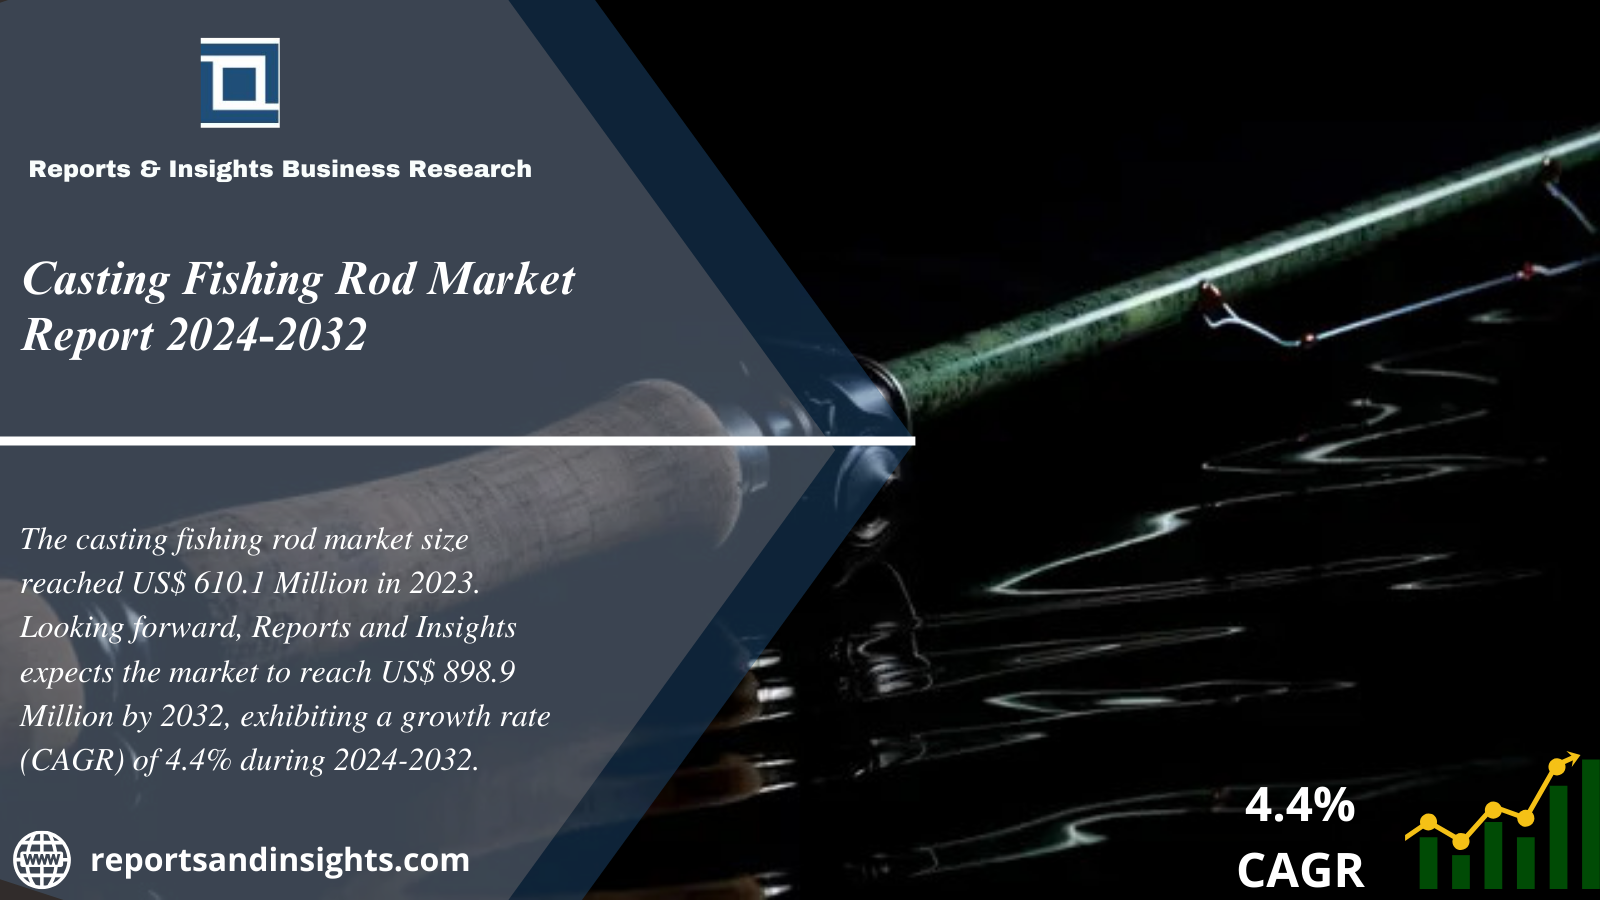 Casting Fishing Rod Market Industry Report, Trends, Share, Size and Future Scope